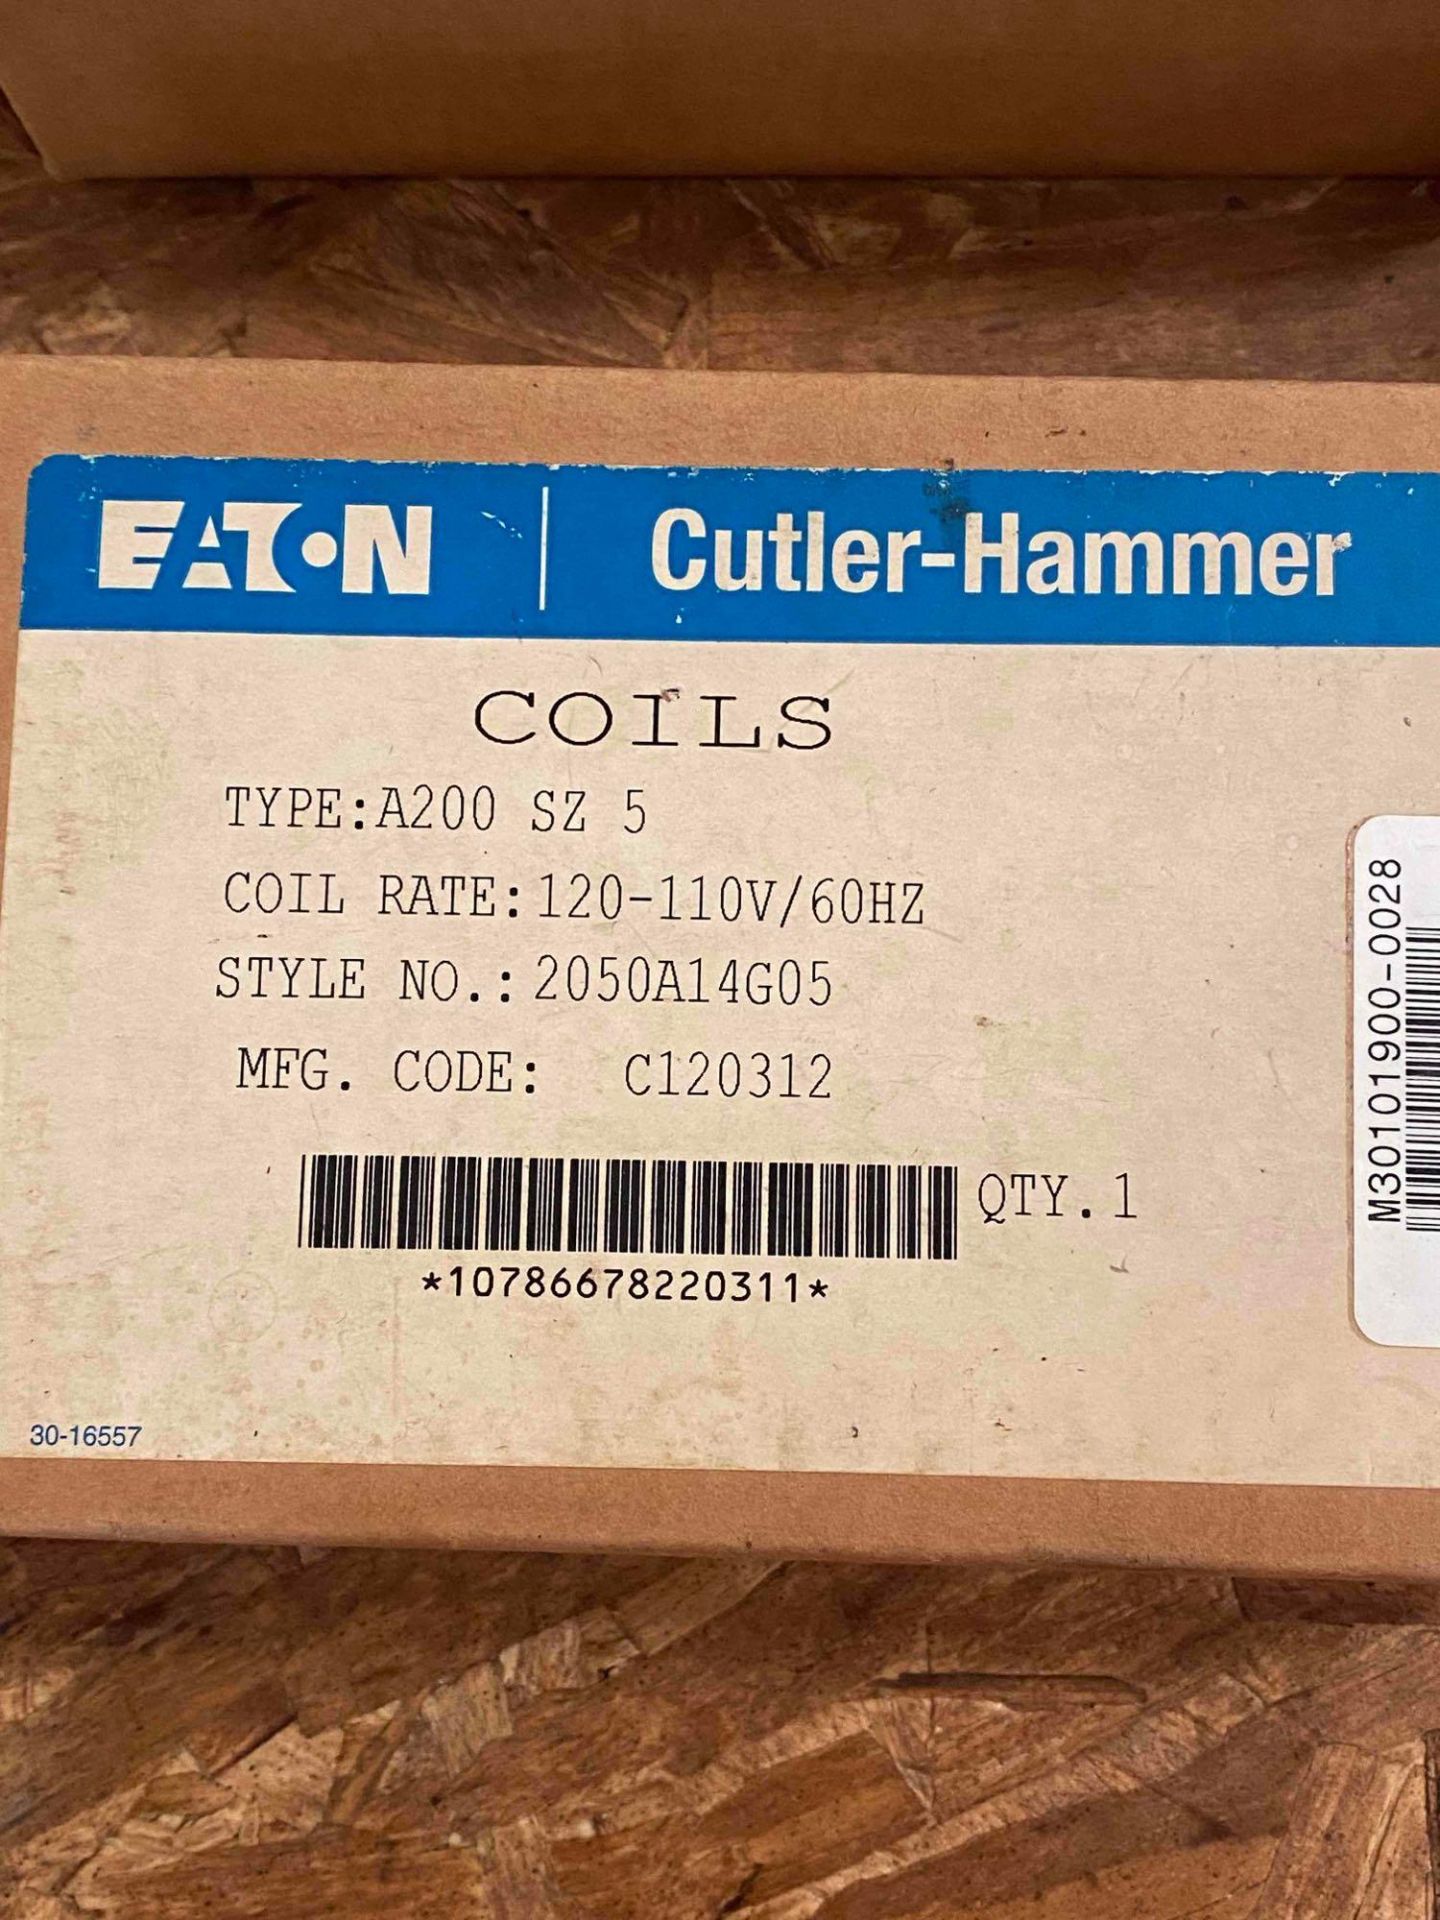 LOT OF (3) Eaton Cutler Hammer A200 Size 5 Coils - Image 2 of 3